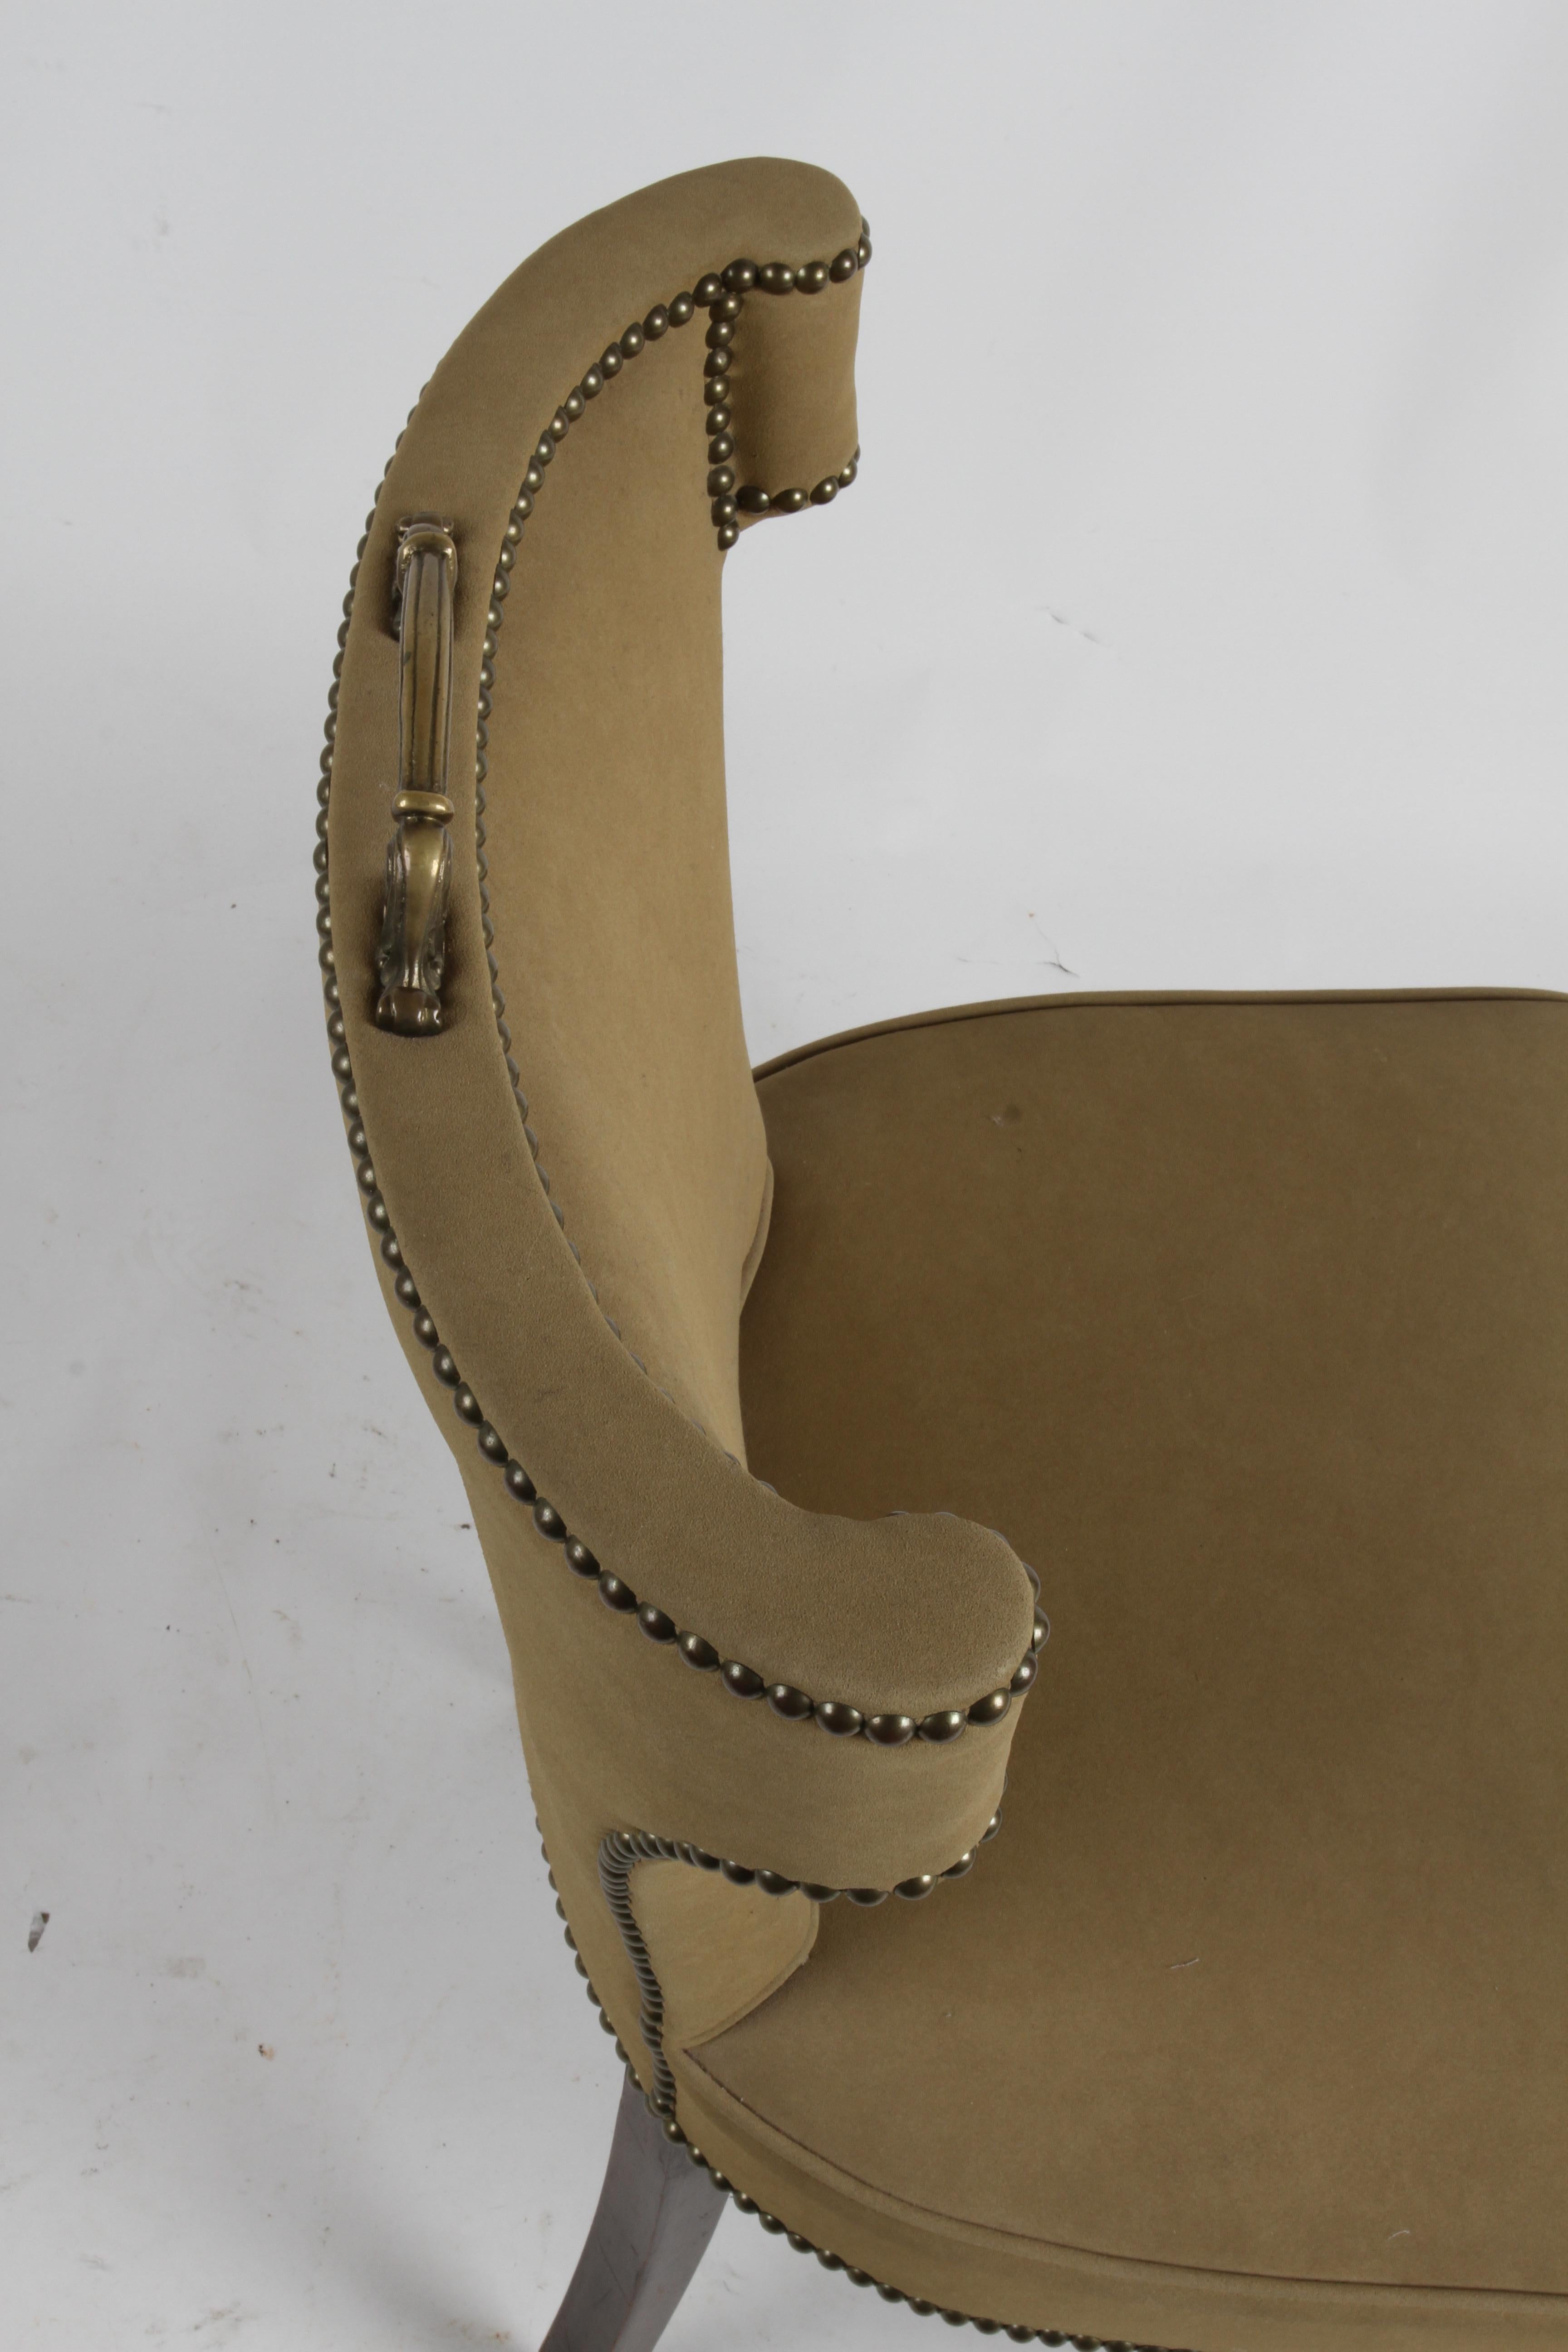 1940s Hollywood Regency Tan Suede Desk Chair with Brass Handle & Nailhead Trim For Sale 1